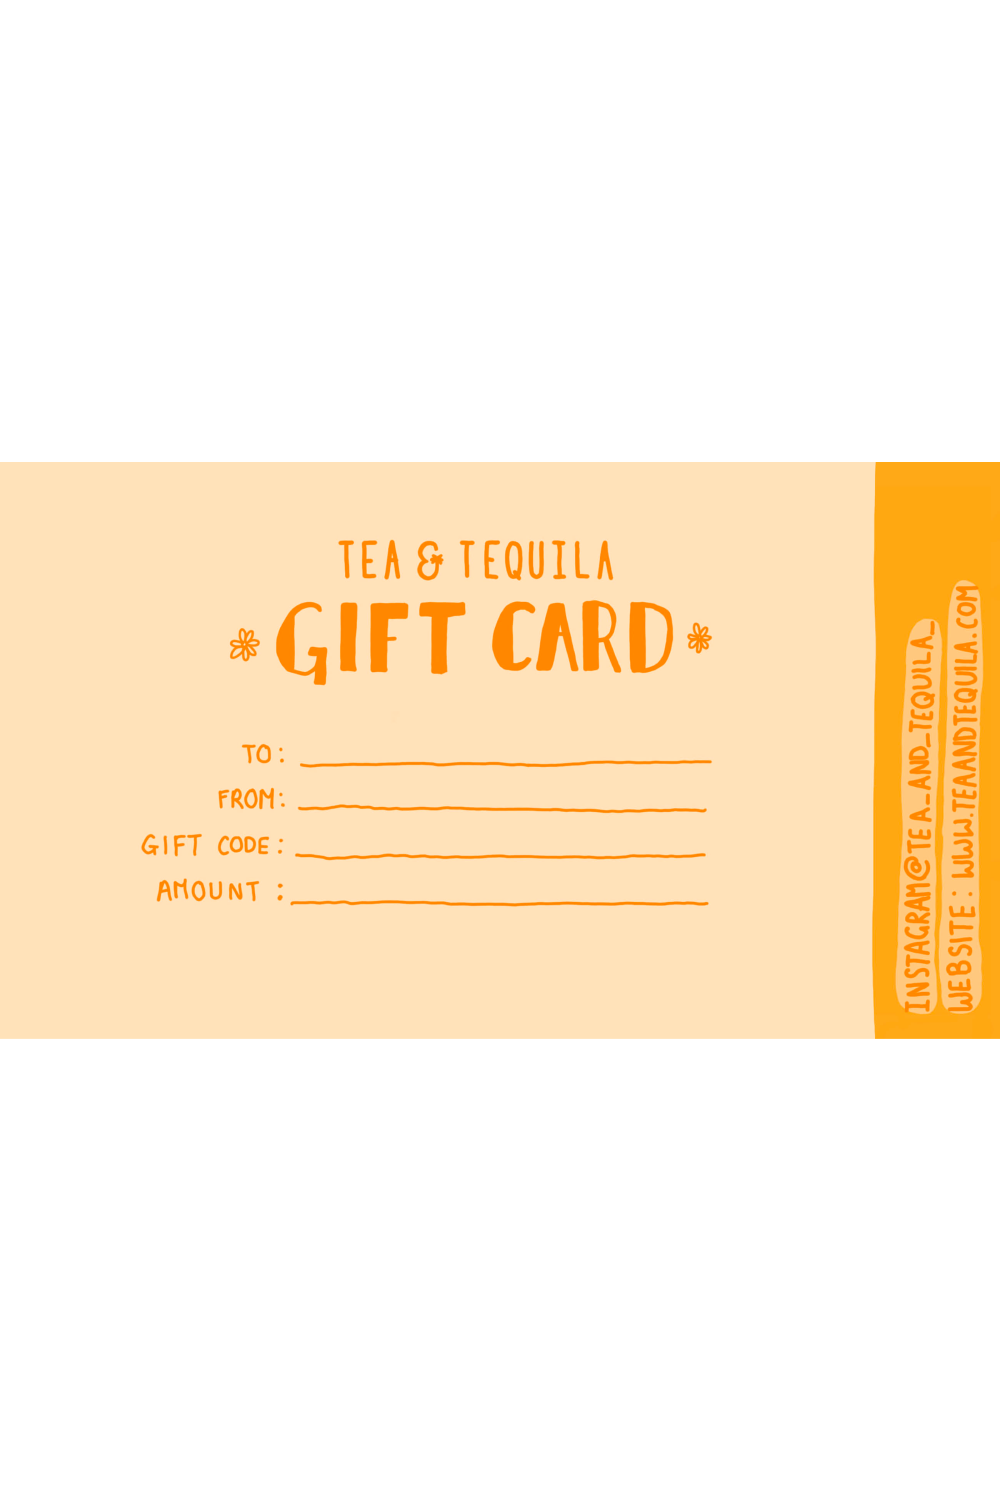 Tea & Tequila Physical Gift Card - Tea & Tequila